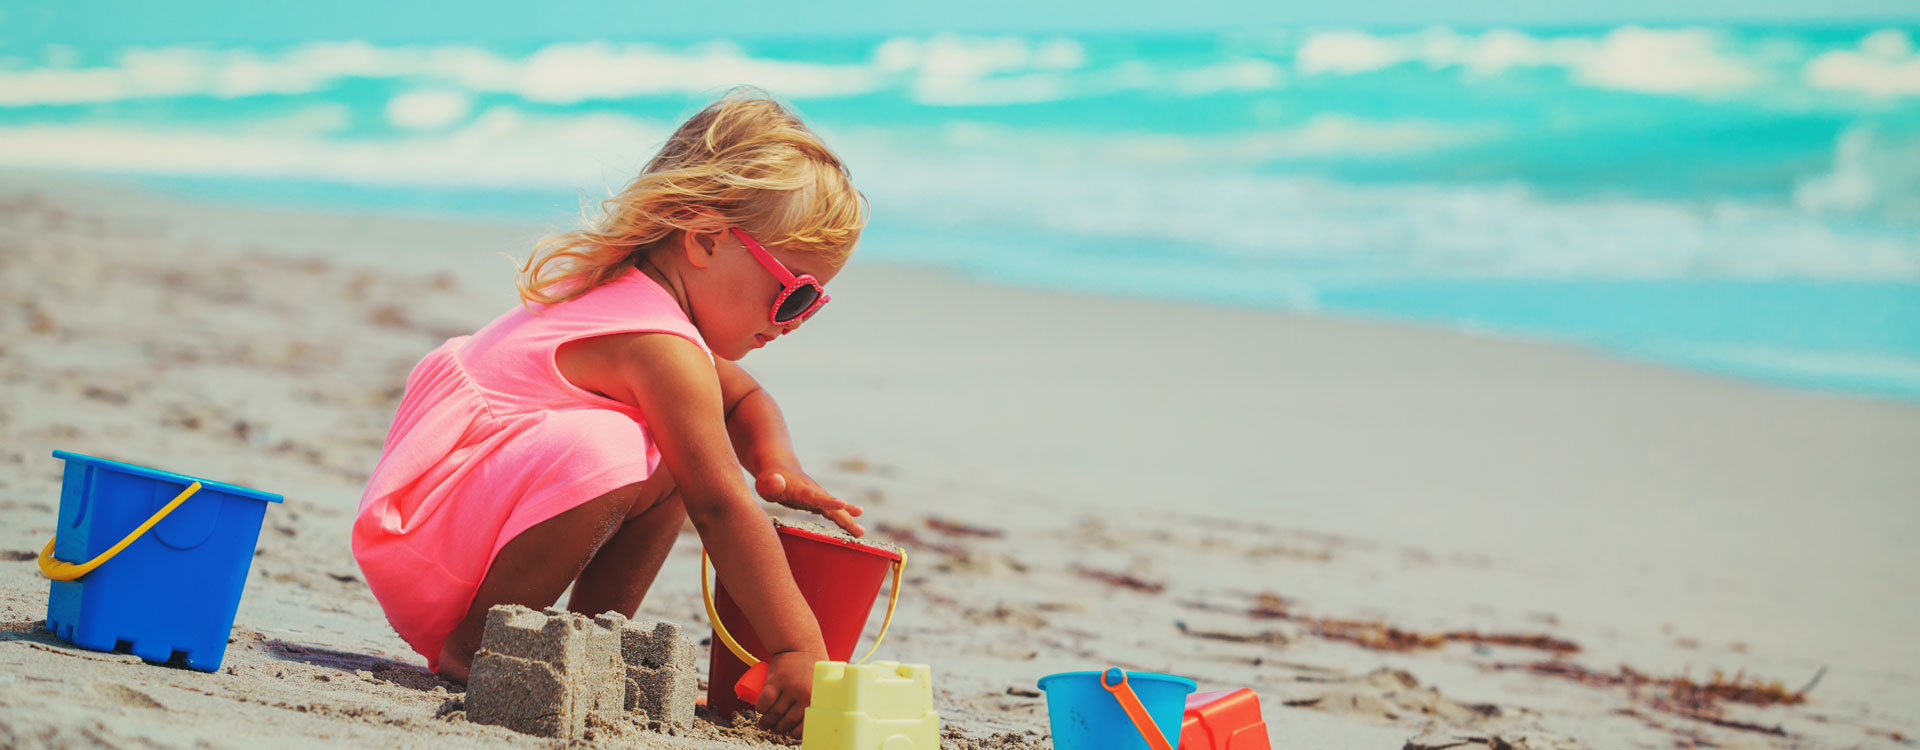 Exciting and simple activities to keep kids busy at the beach